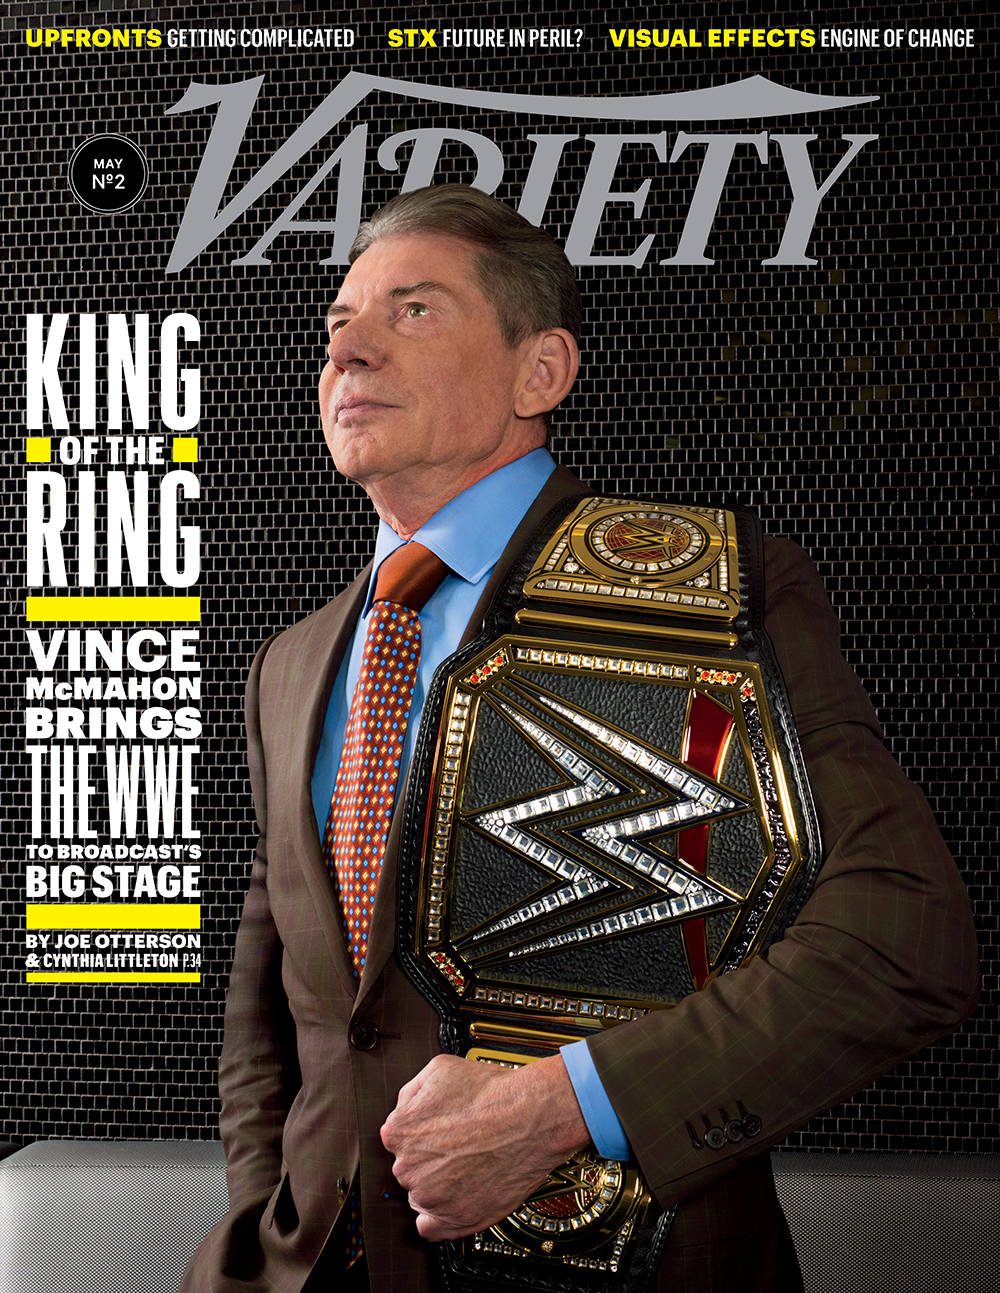 Male Grooming for Vince McMahon